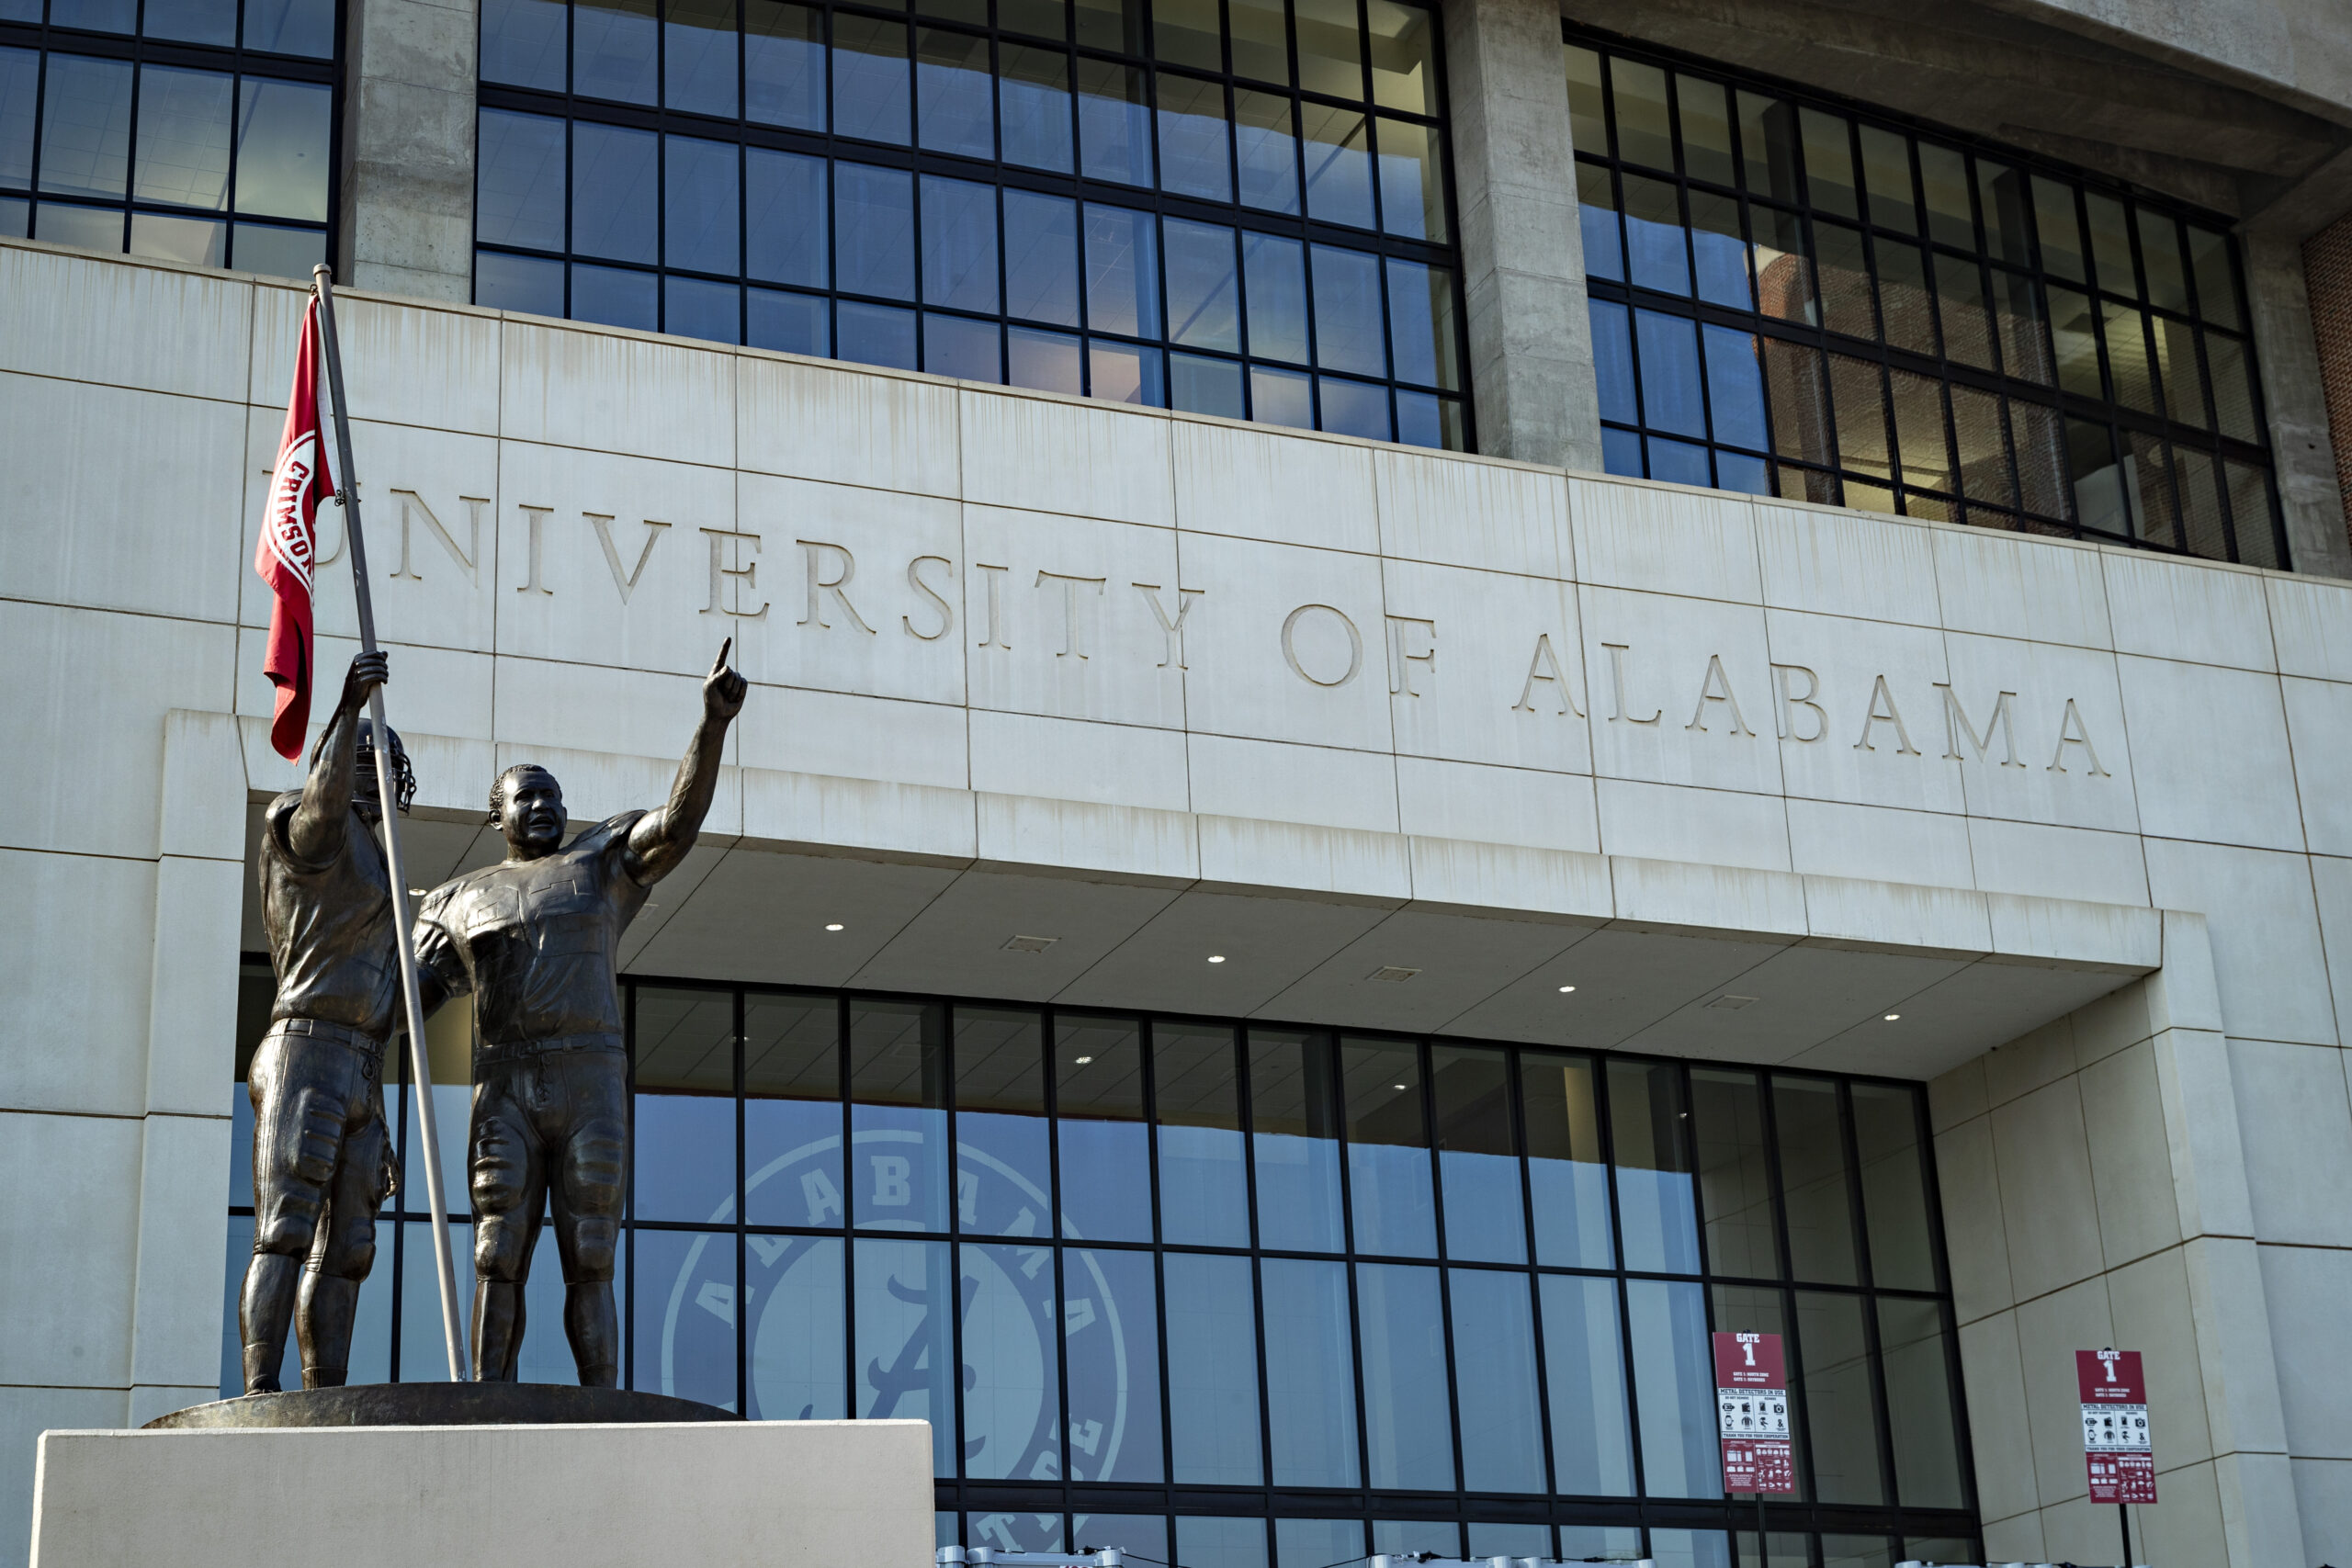 TUSCALOOSA, AL - SEPTEMBER 22:  Statue outside of  Bryant-Denny Stadium on the campus of the University of Alabama before a game between the Alabama Crimson Tide and the Texas A&M Aggies at Bryant-Denny Stadium on September 22, 2018 in Tuscaloosa, Alabama.  (Photo by Wesley Hitt/Getty Images)